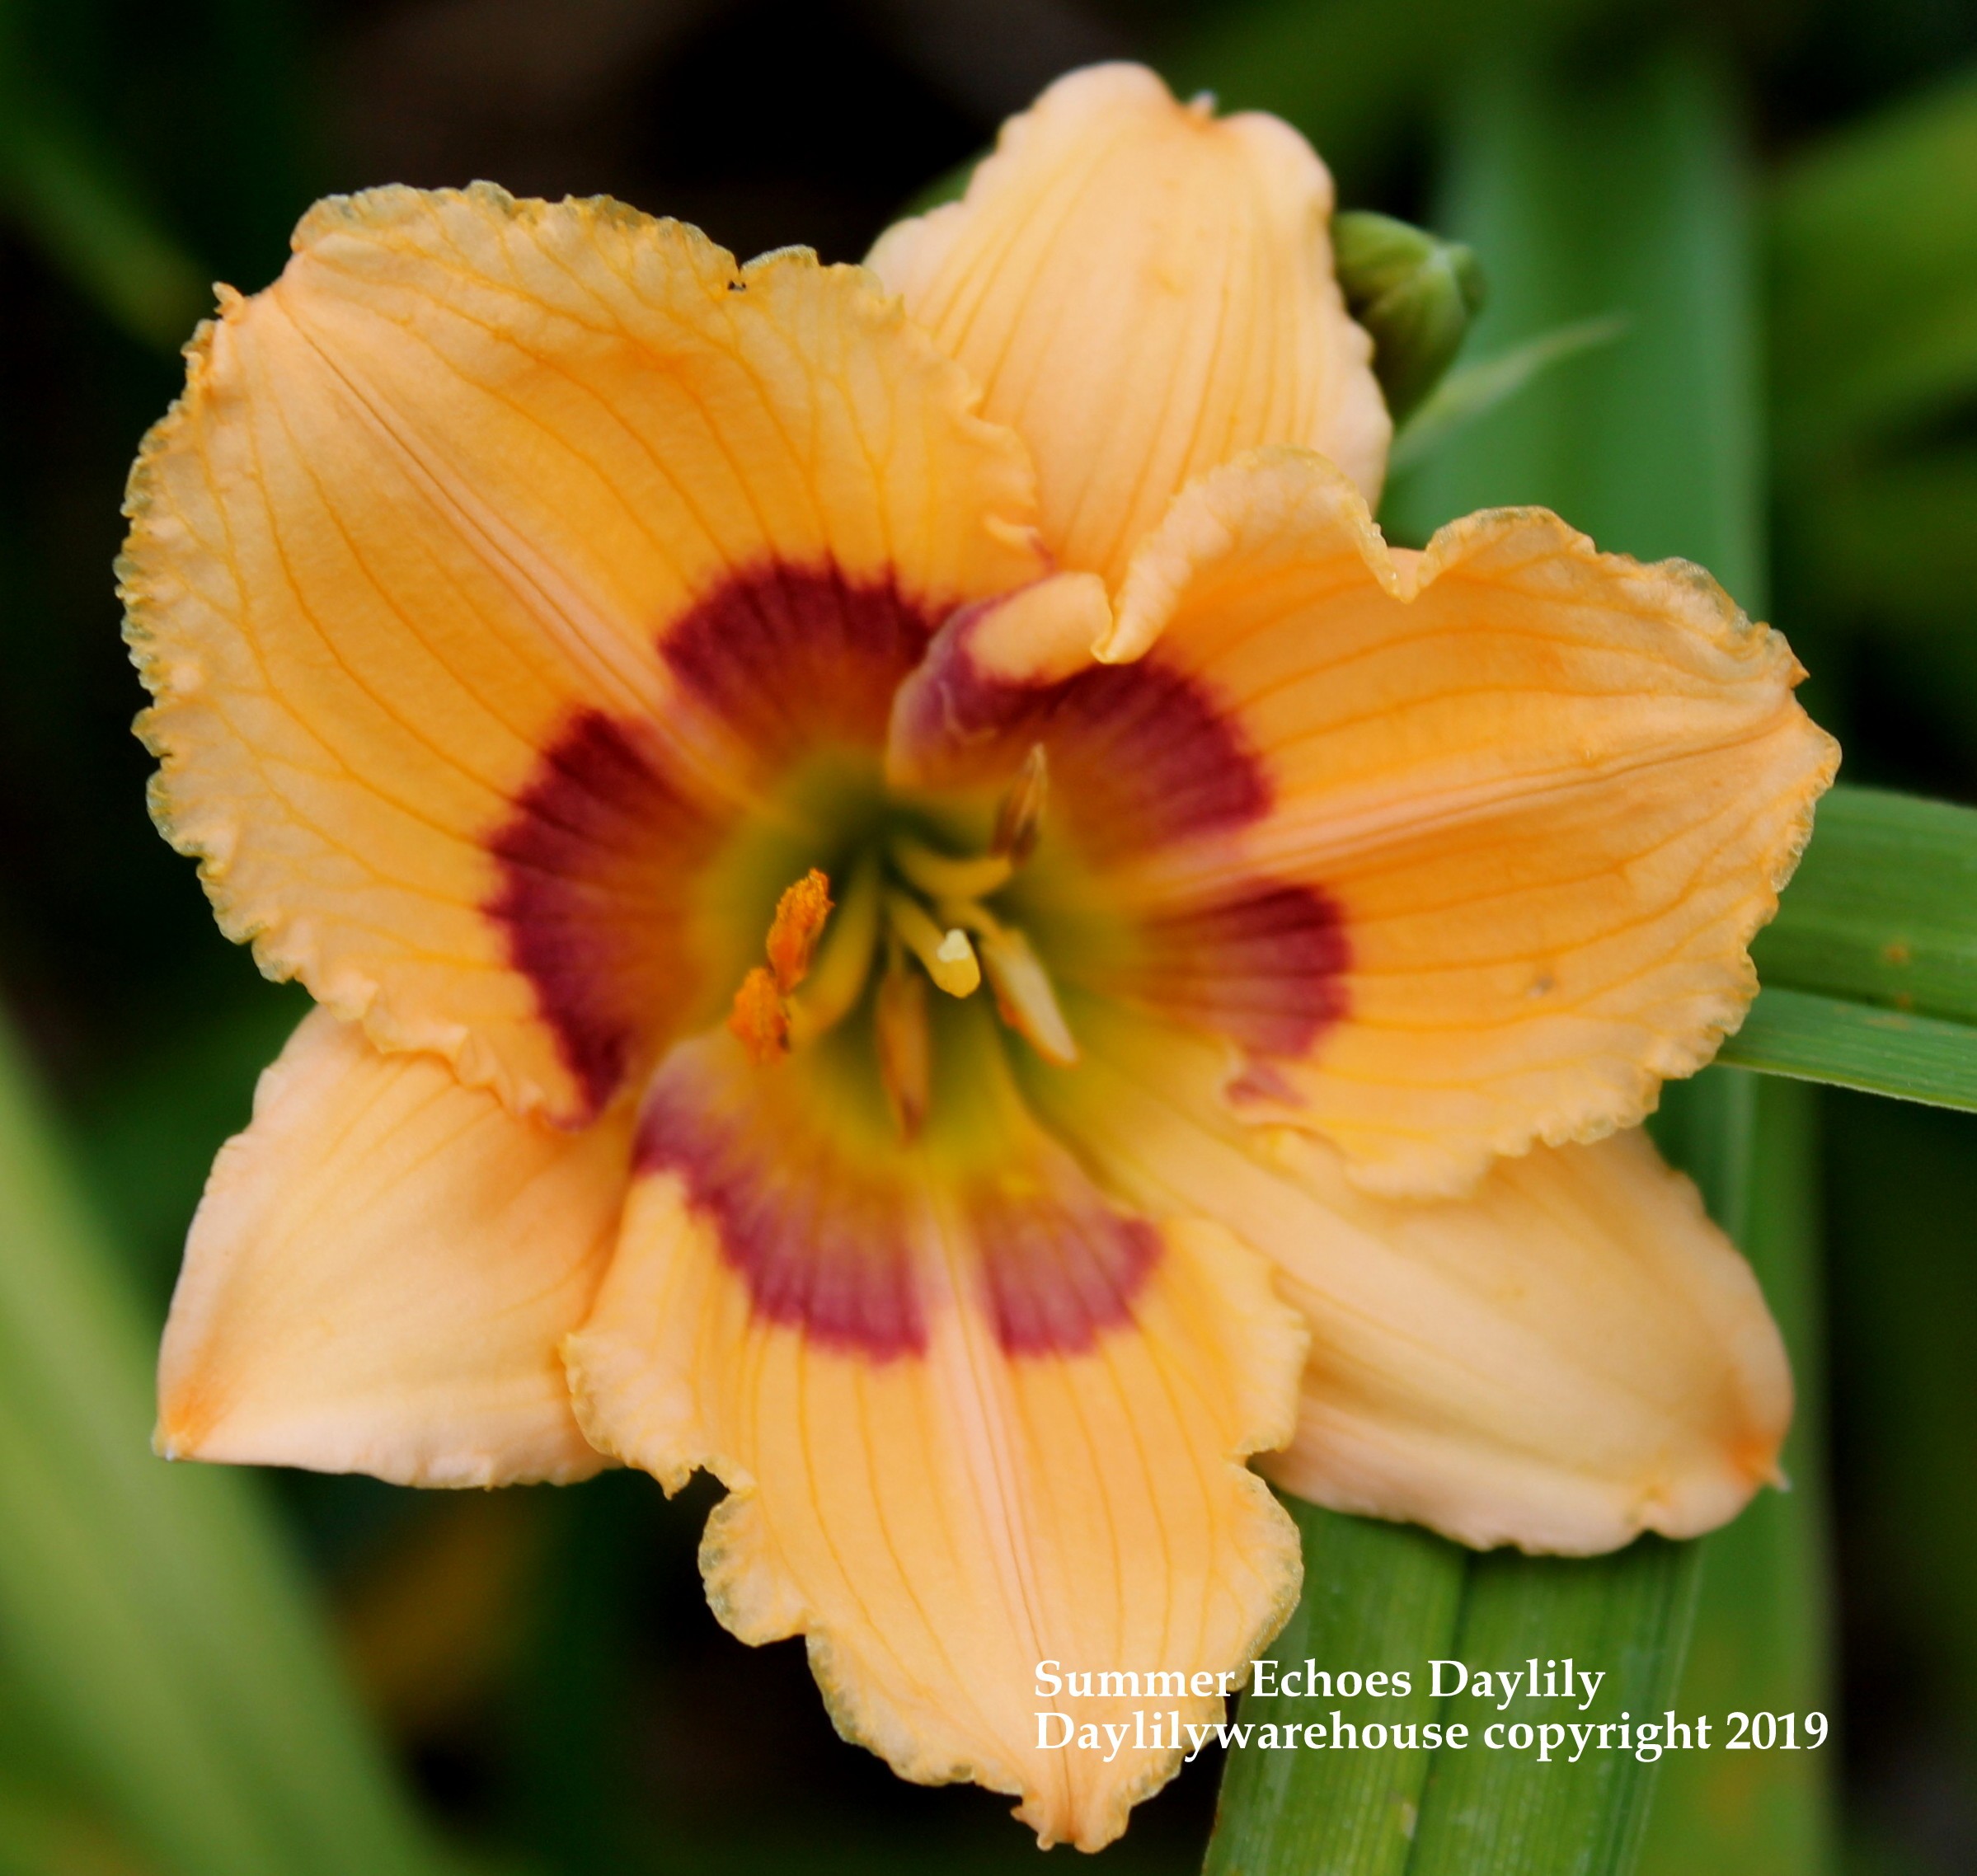 Summer Echoes Daylily